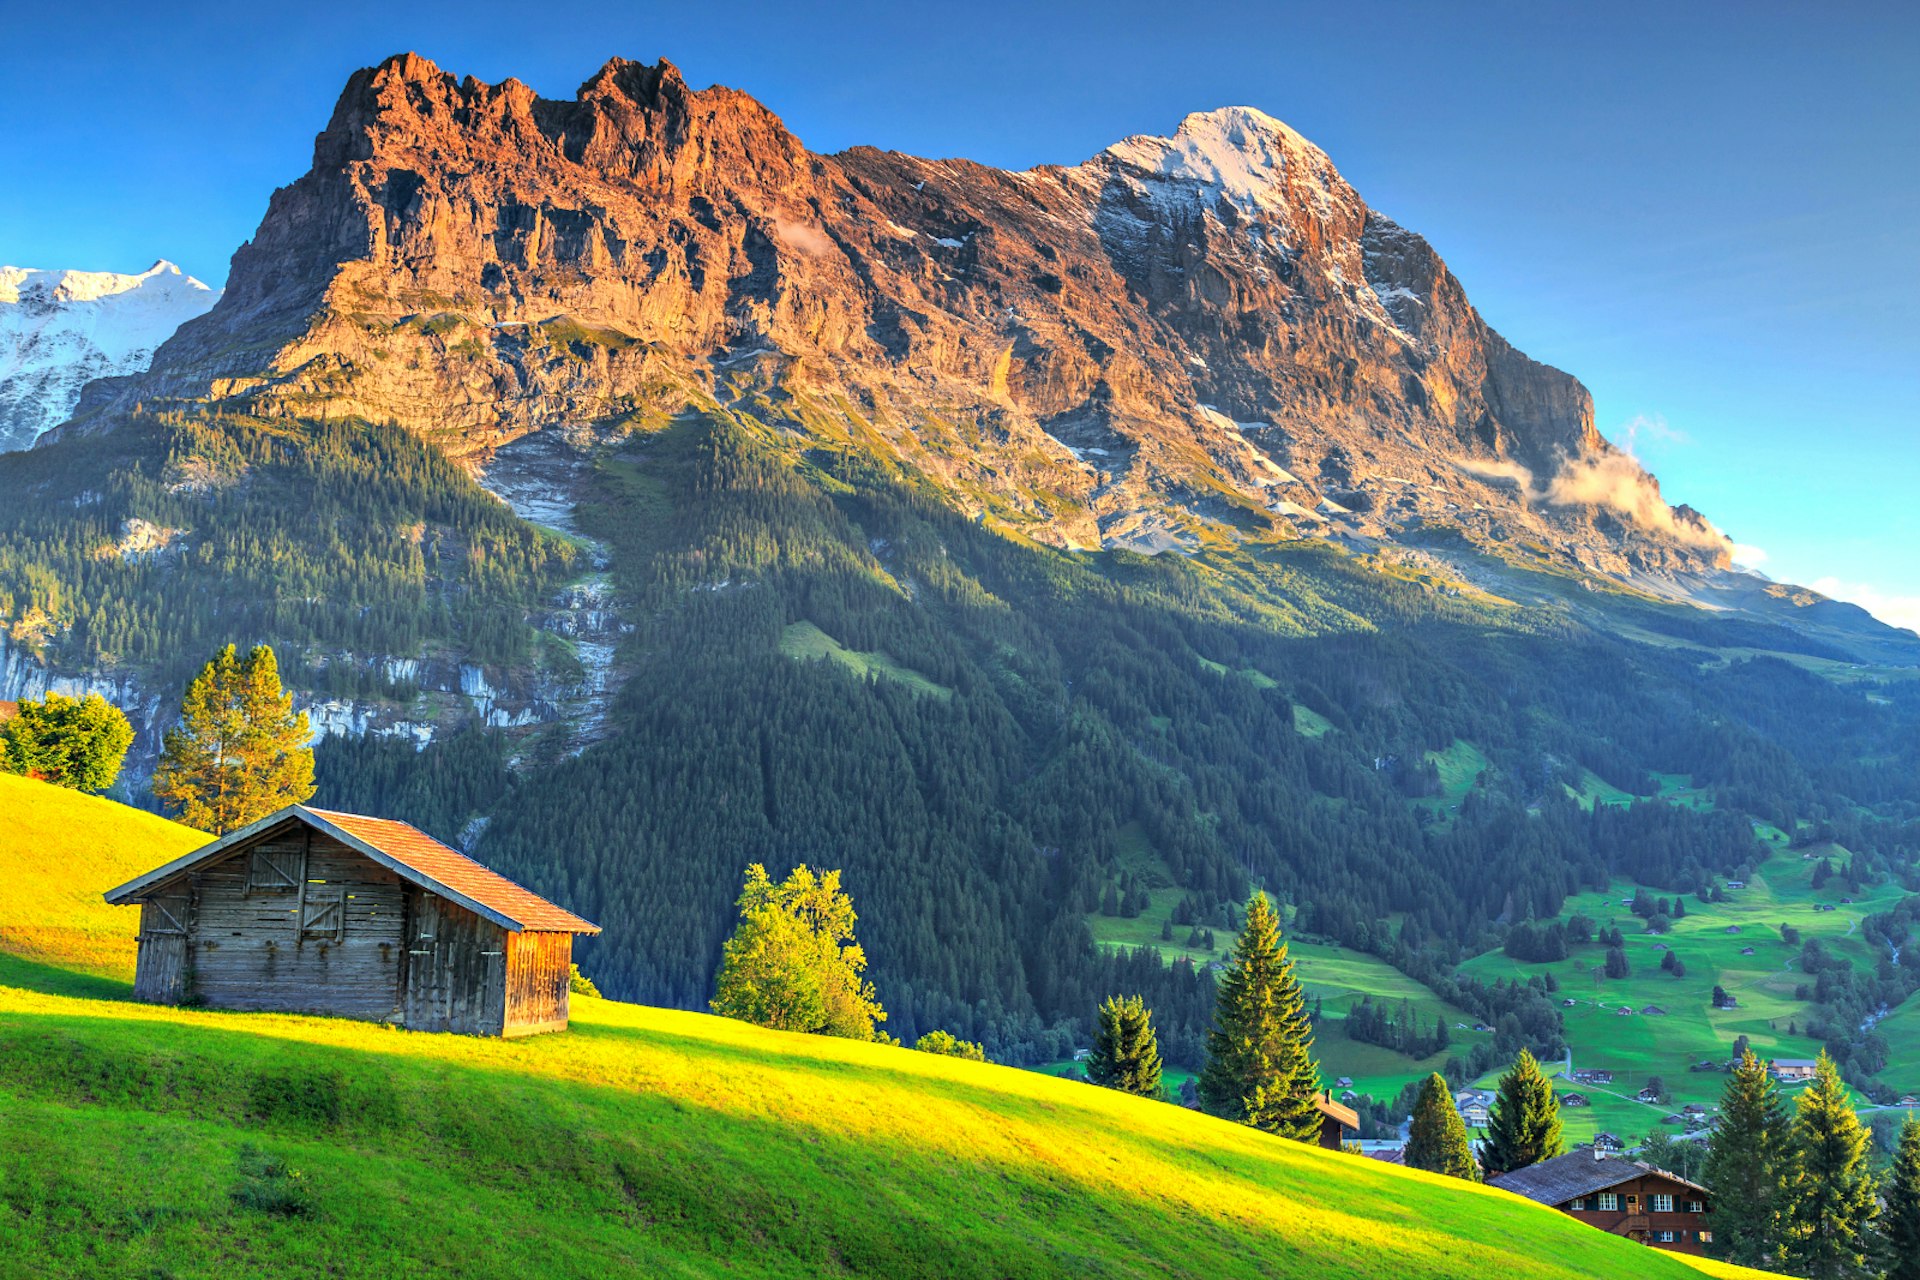 A mountainside hut in front of the Eiger peak in Bernese Oberland, Switzerland